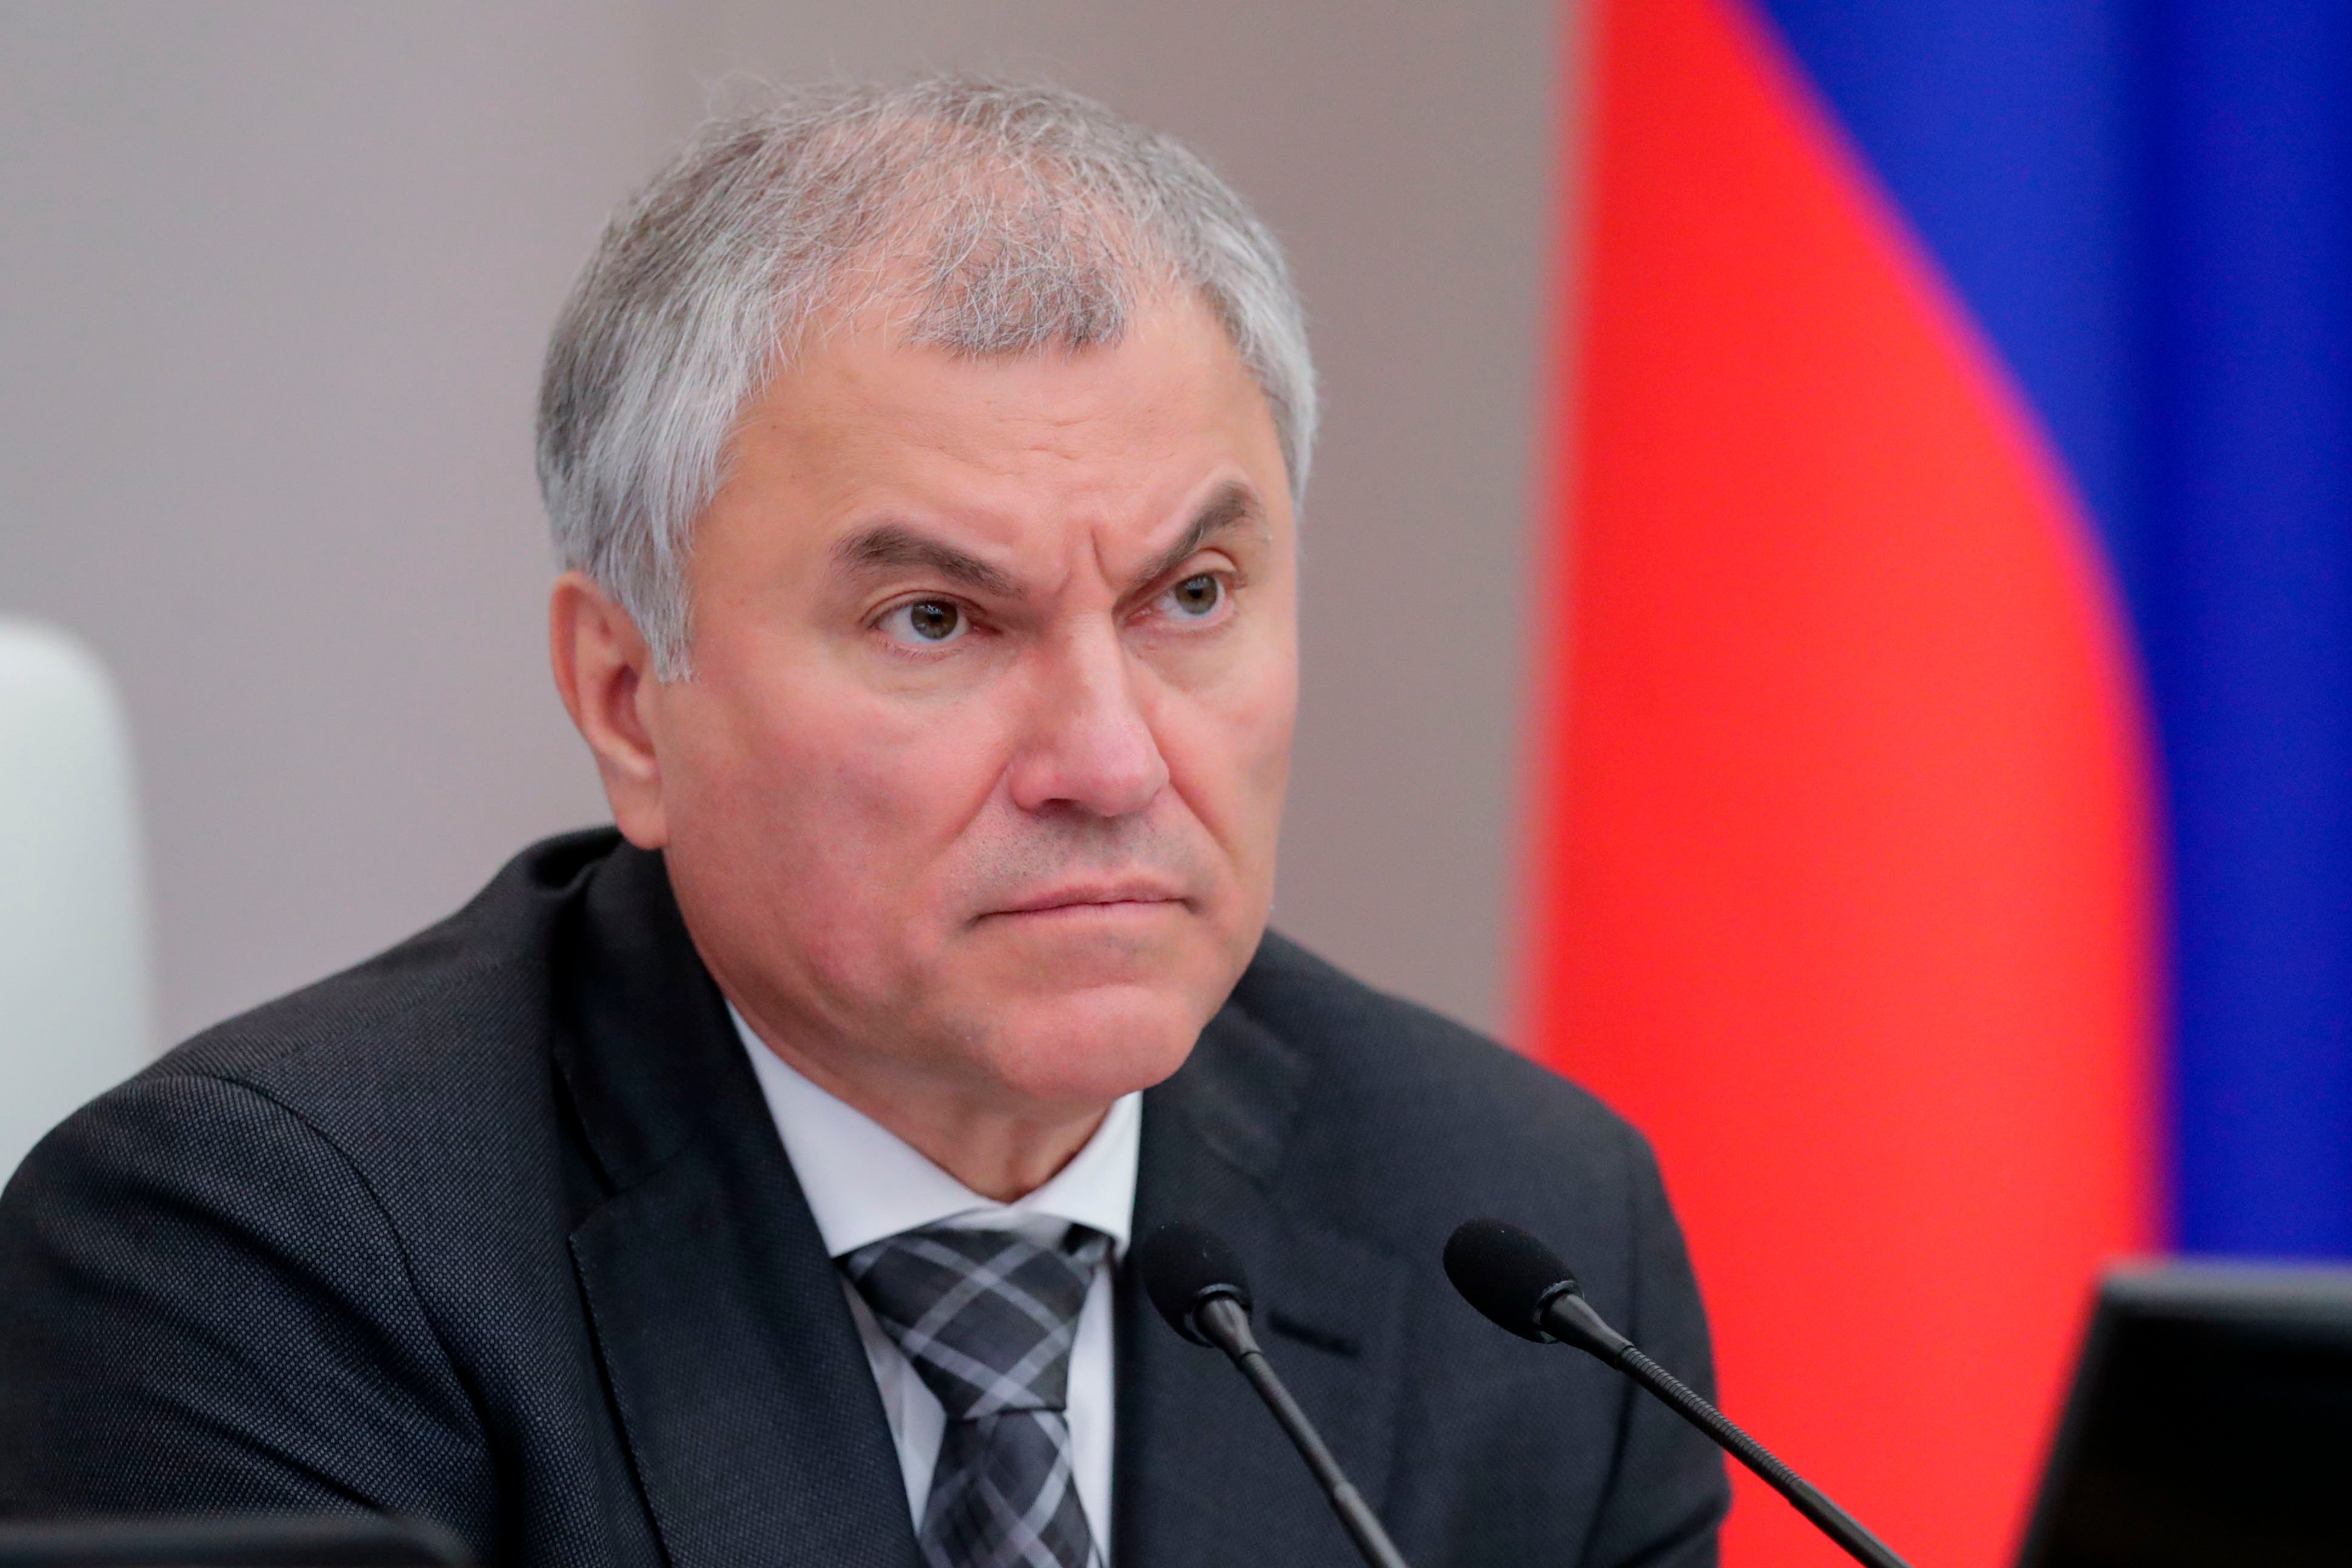 Vyacheslav Volodin announced the decision to withdraw the 1956 fishing deal with the UK